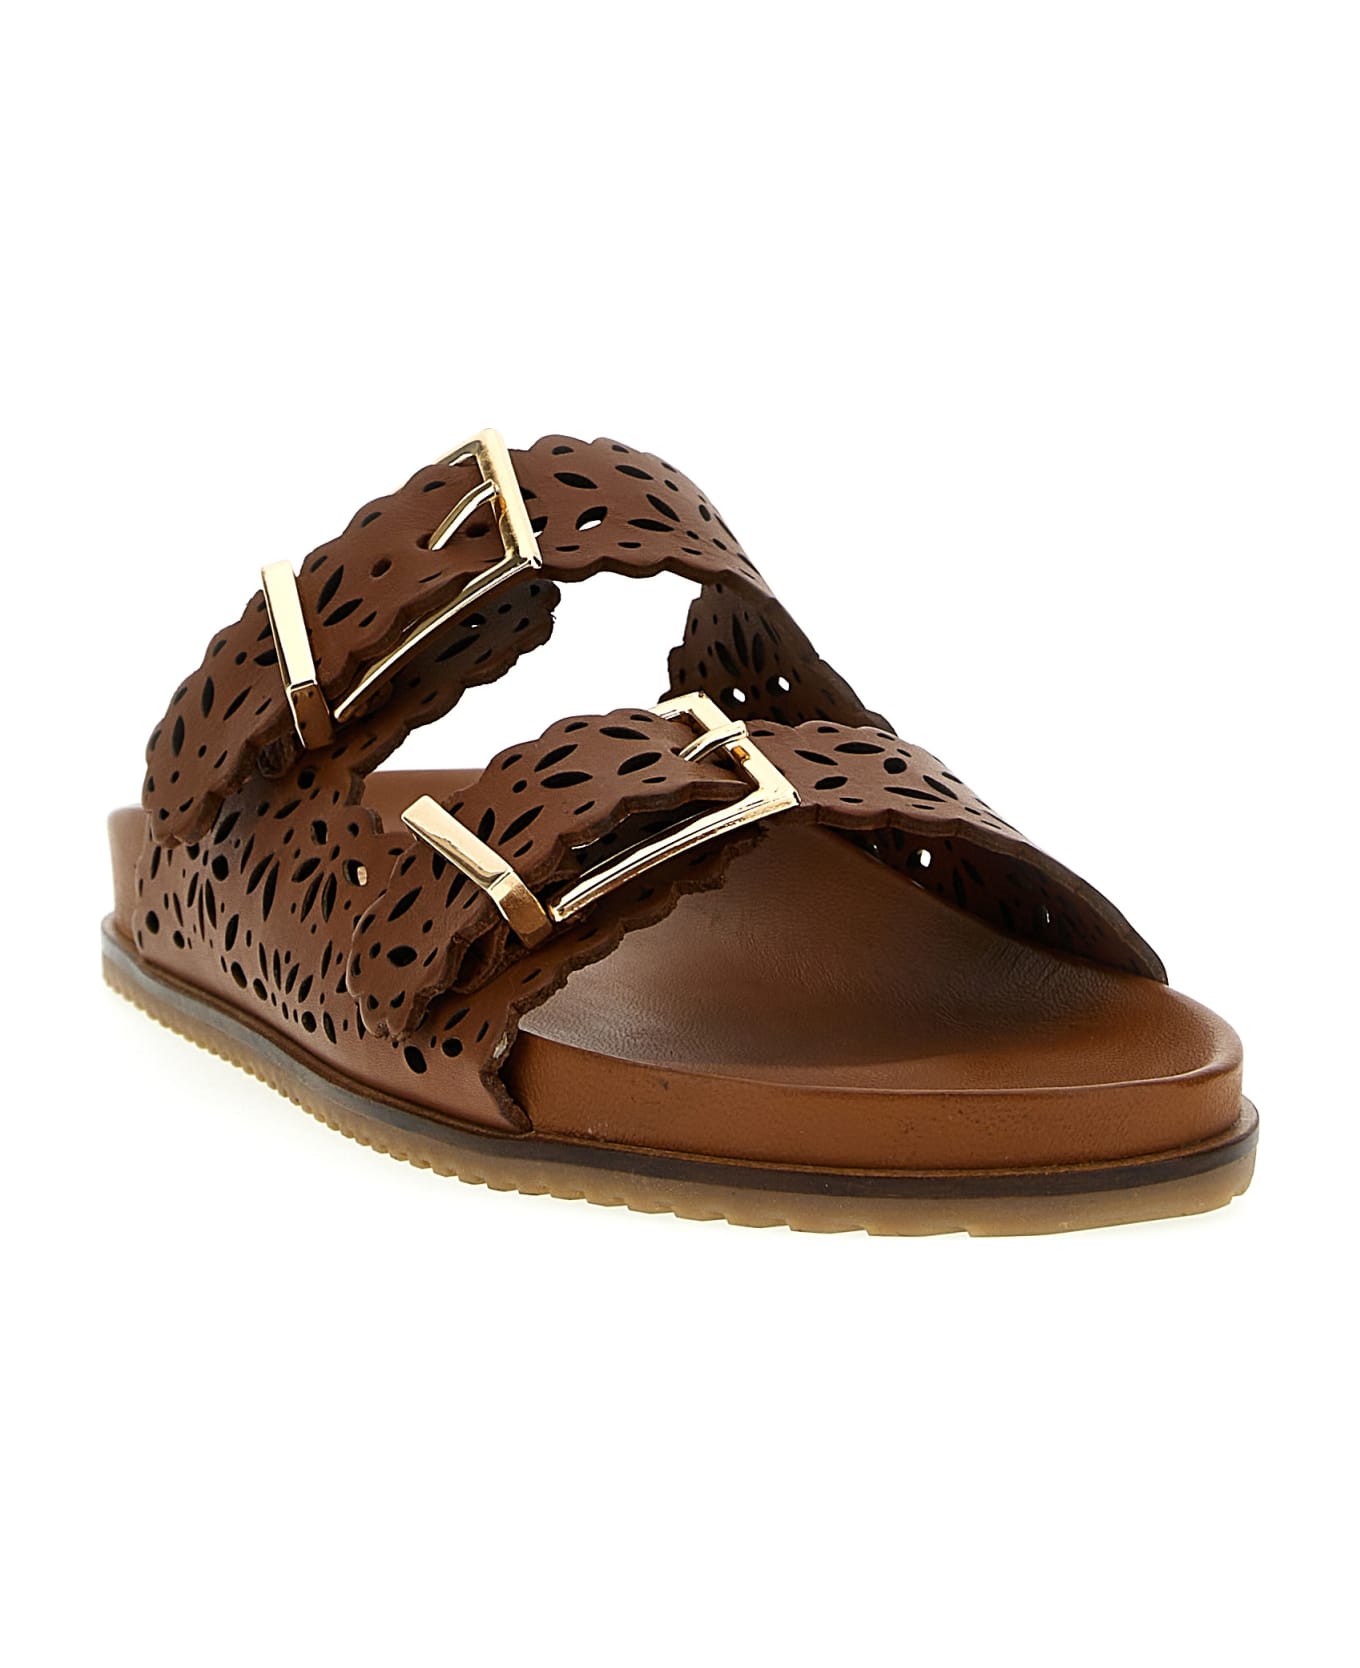 TwinSet Openwork Leather Sandals - Brown サンダル